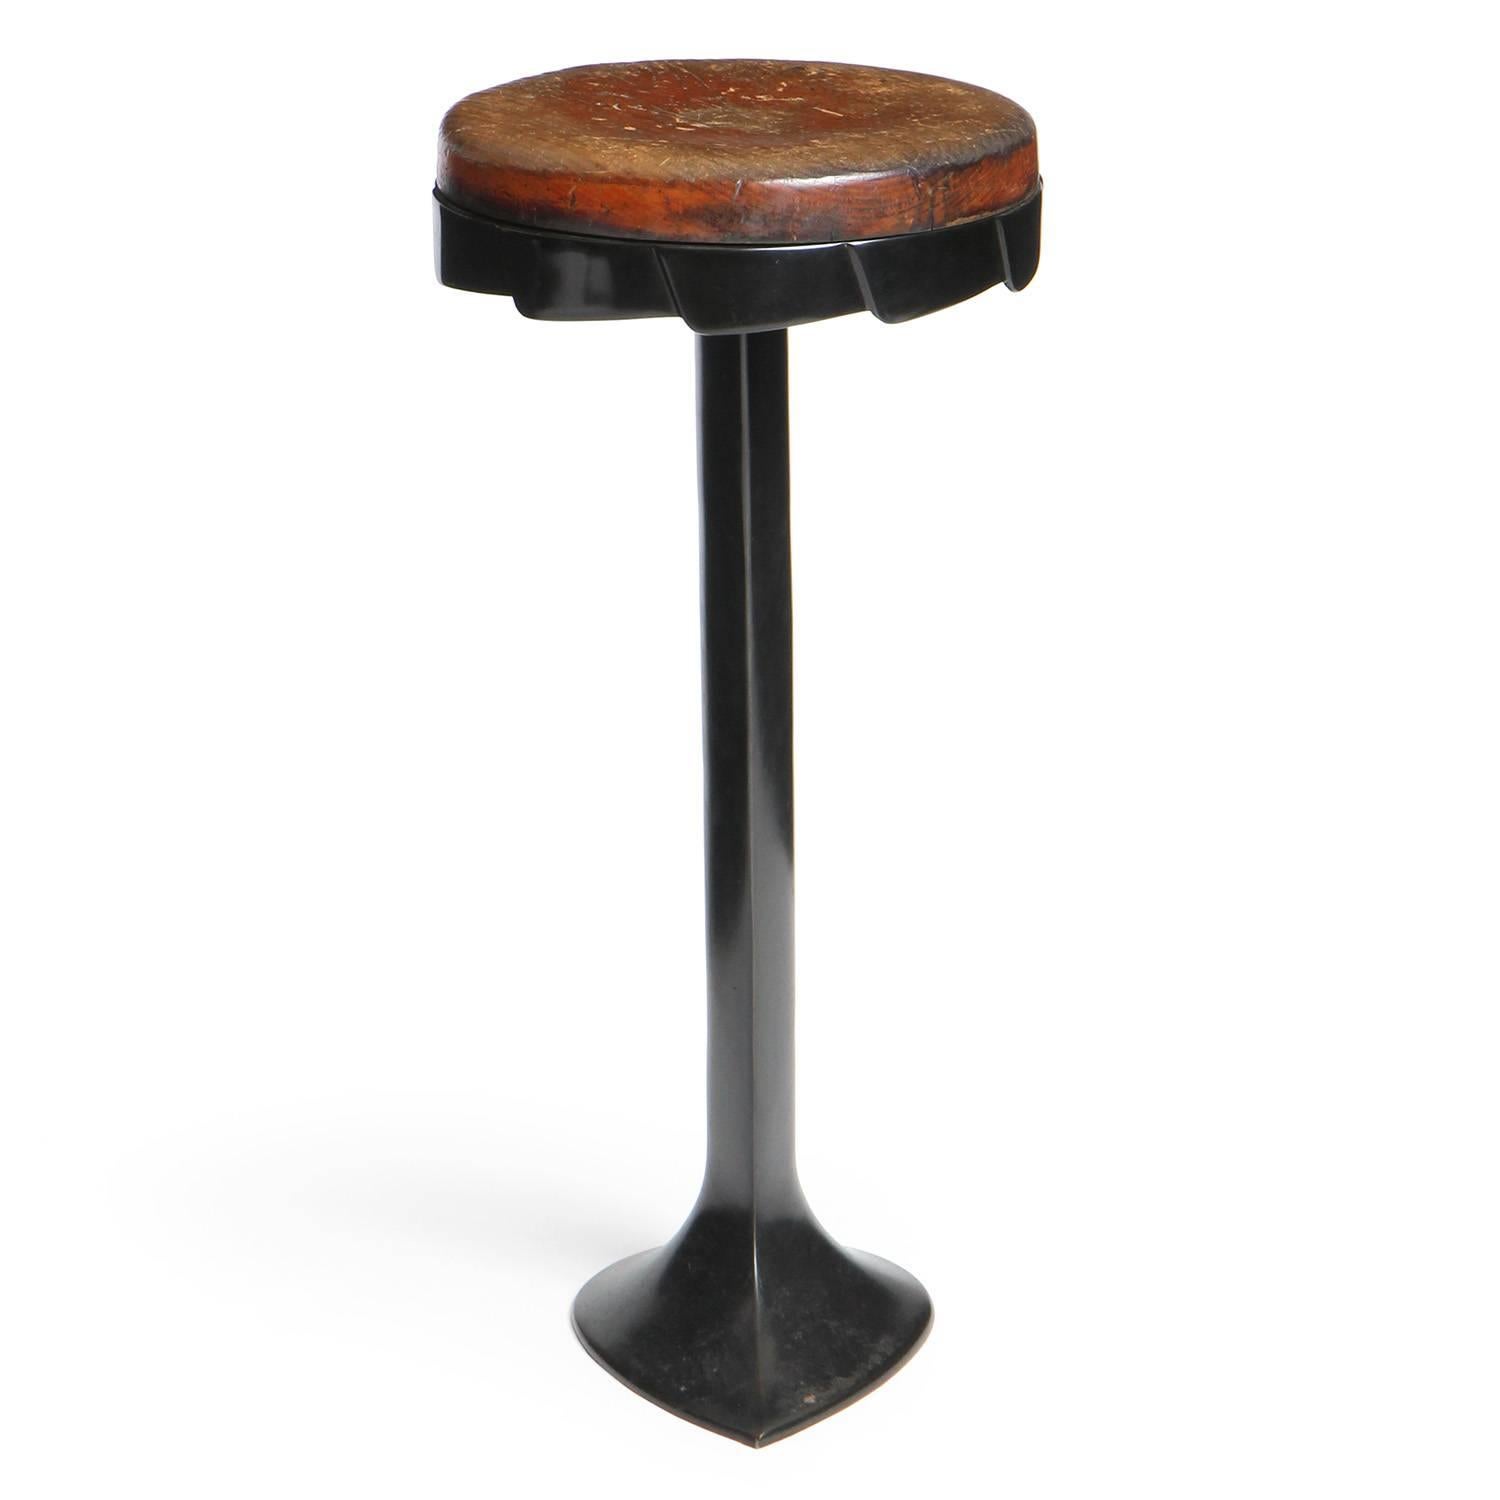 A patinated cast iron barstool with a dished wooden swivel seat and 